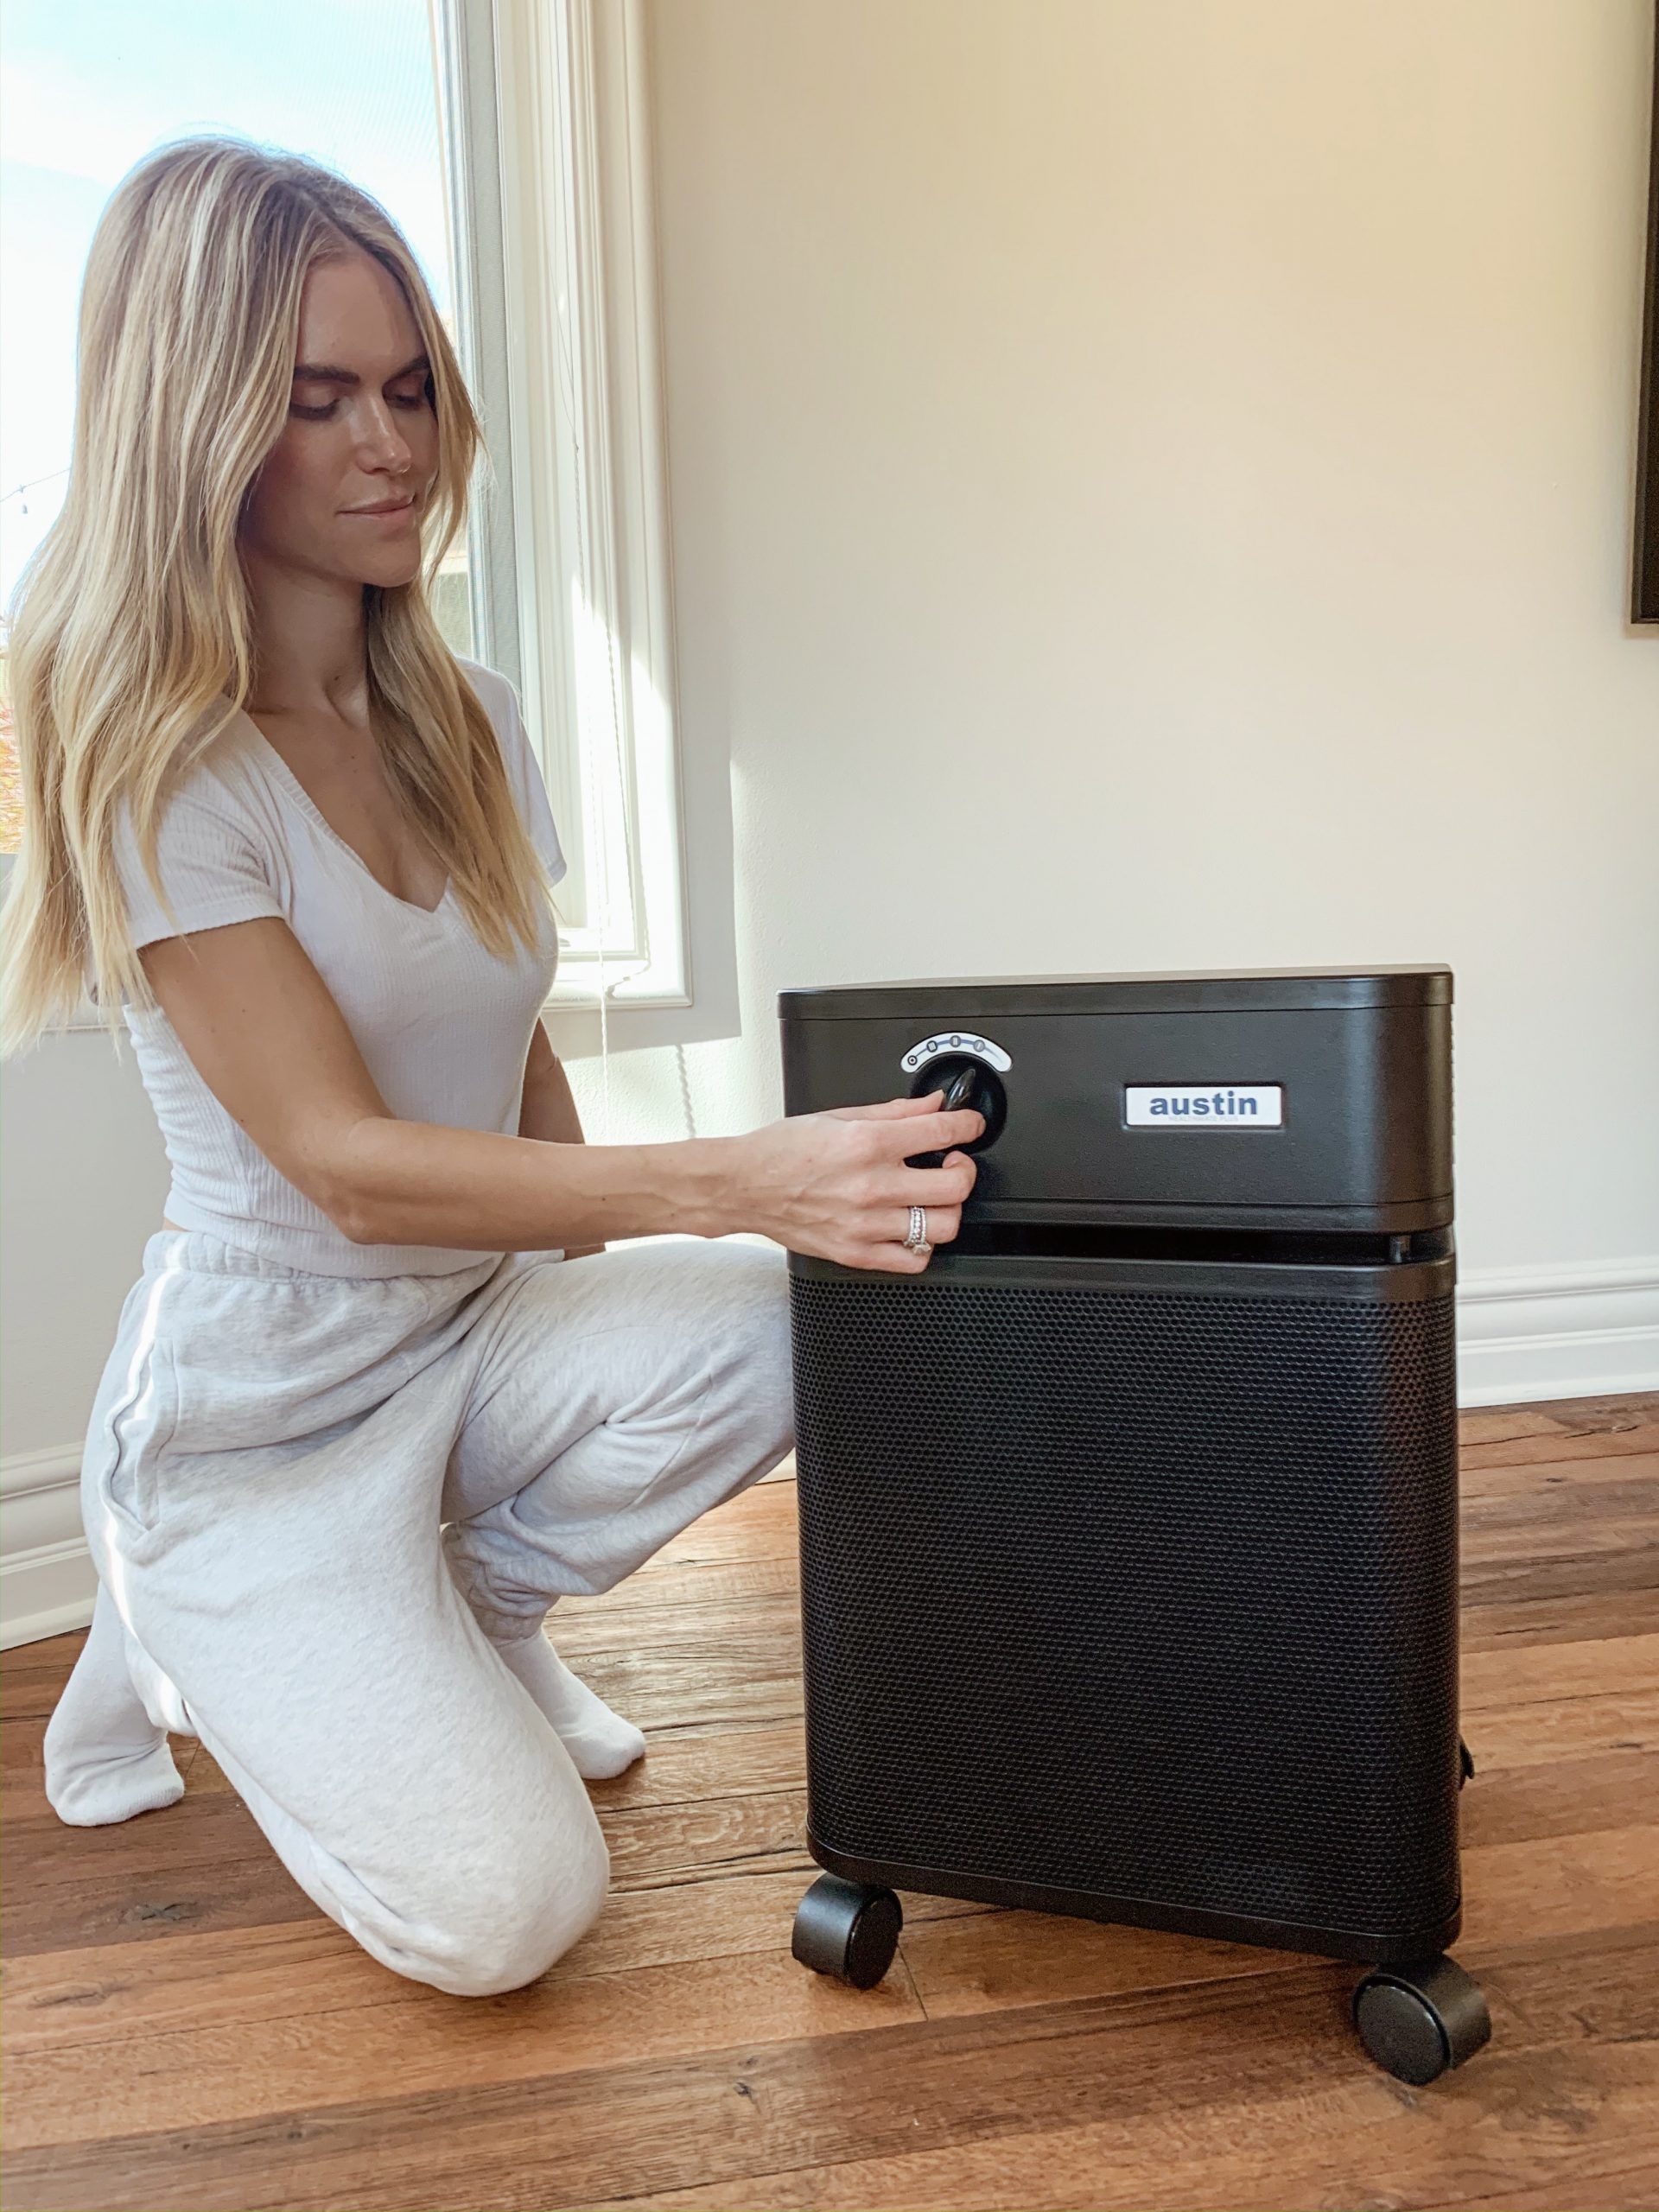 Lauren Scruggs Kennedy recommends the Austin Air HealthMate Plus